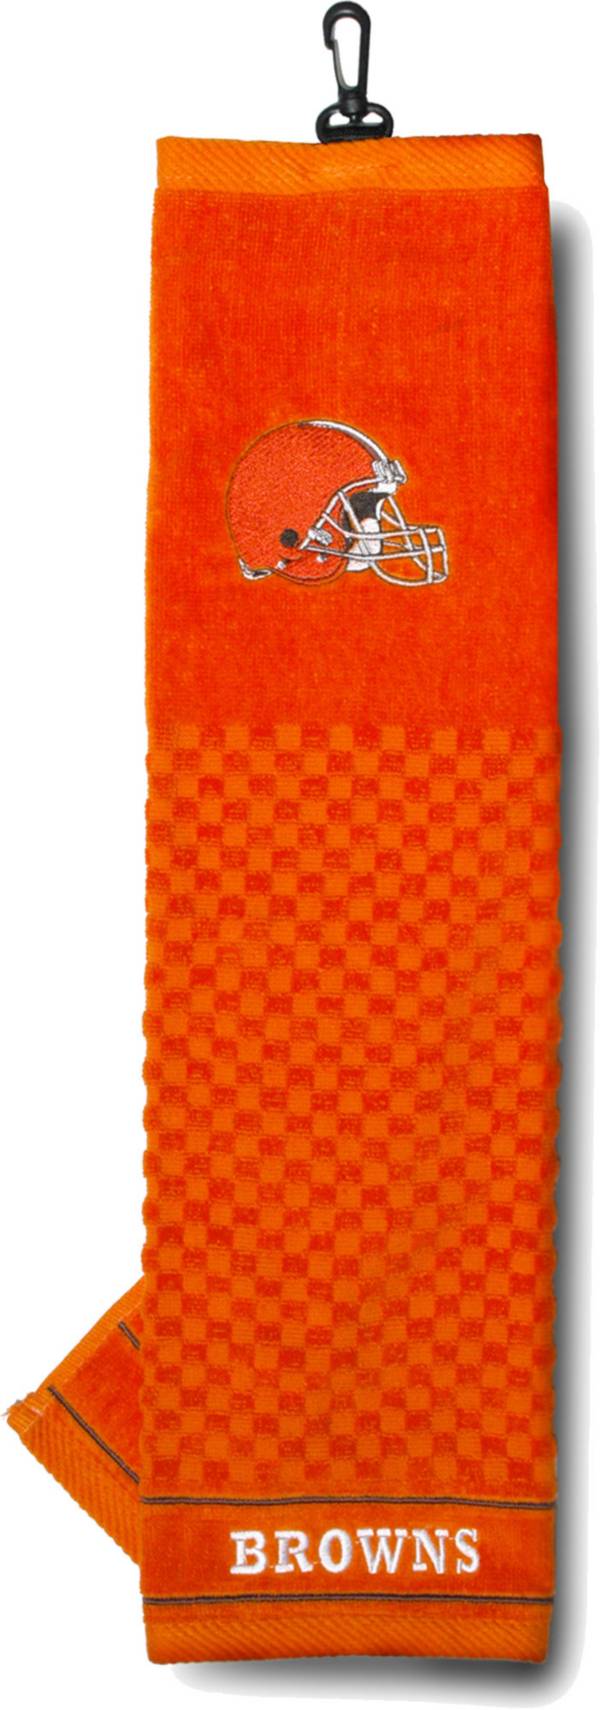 Team Golf Cleveland Browns Embroidered Towel product image